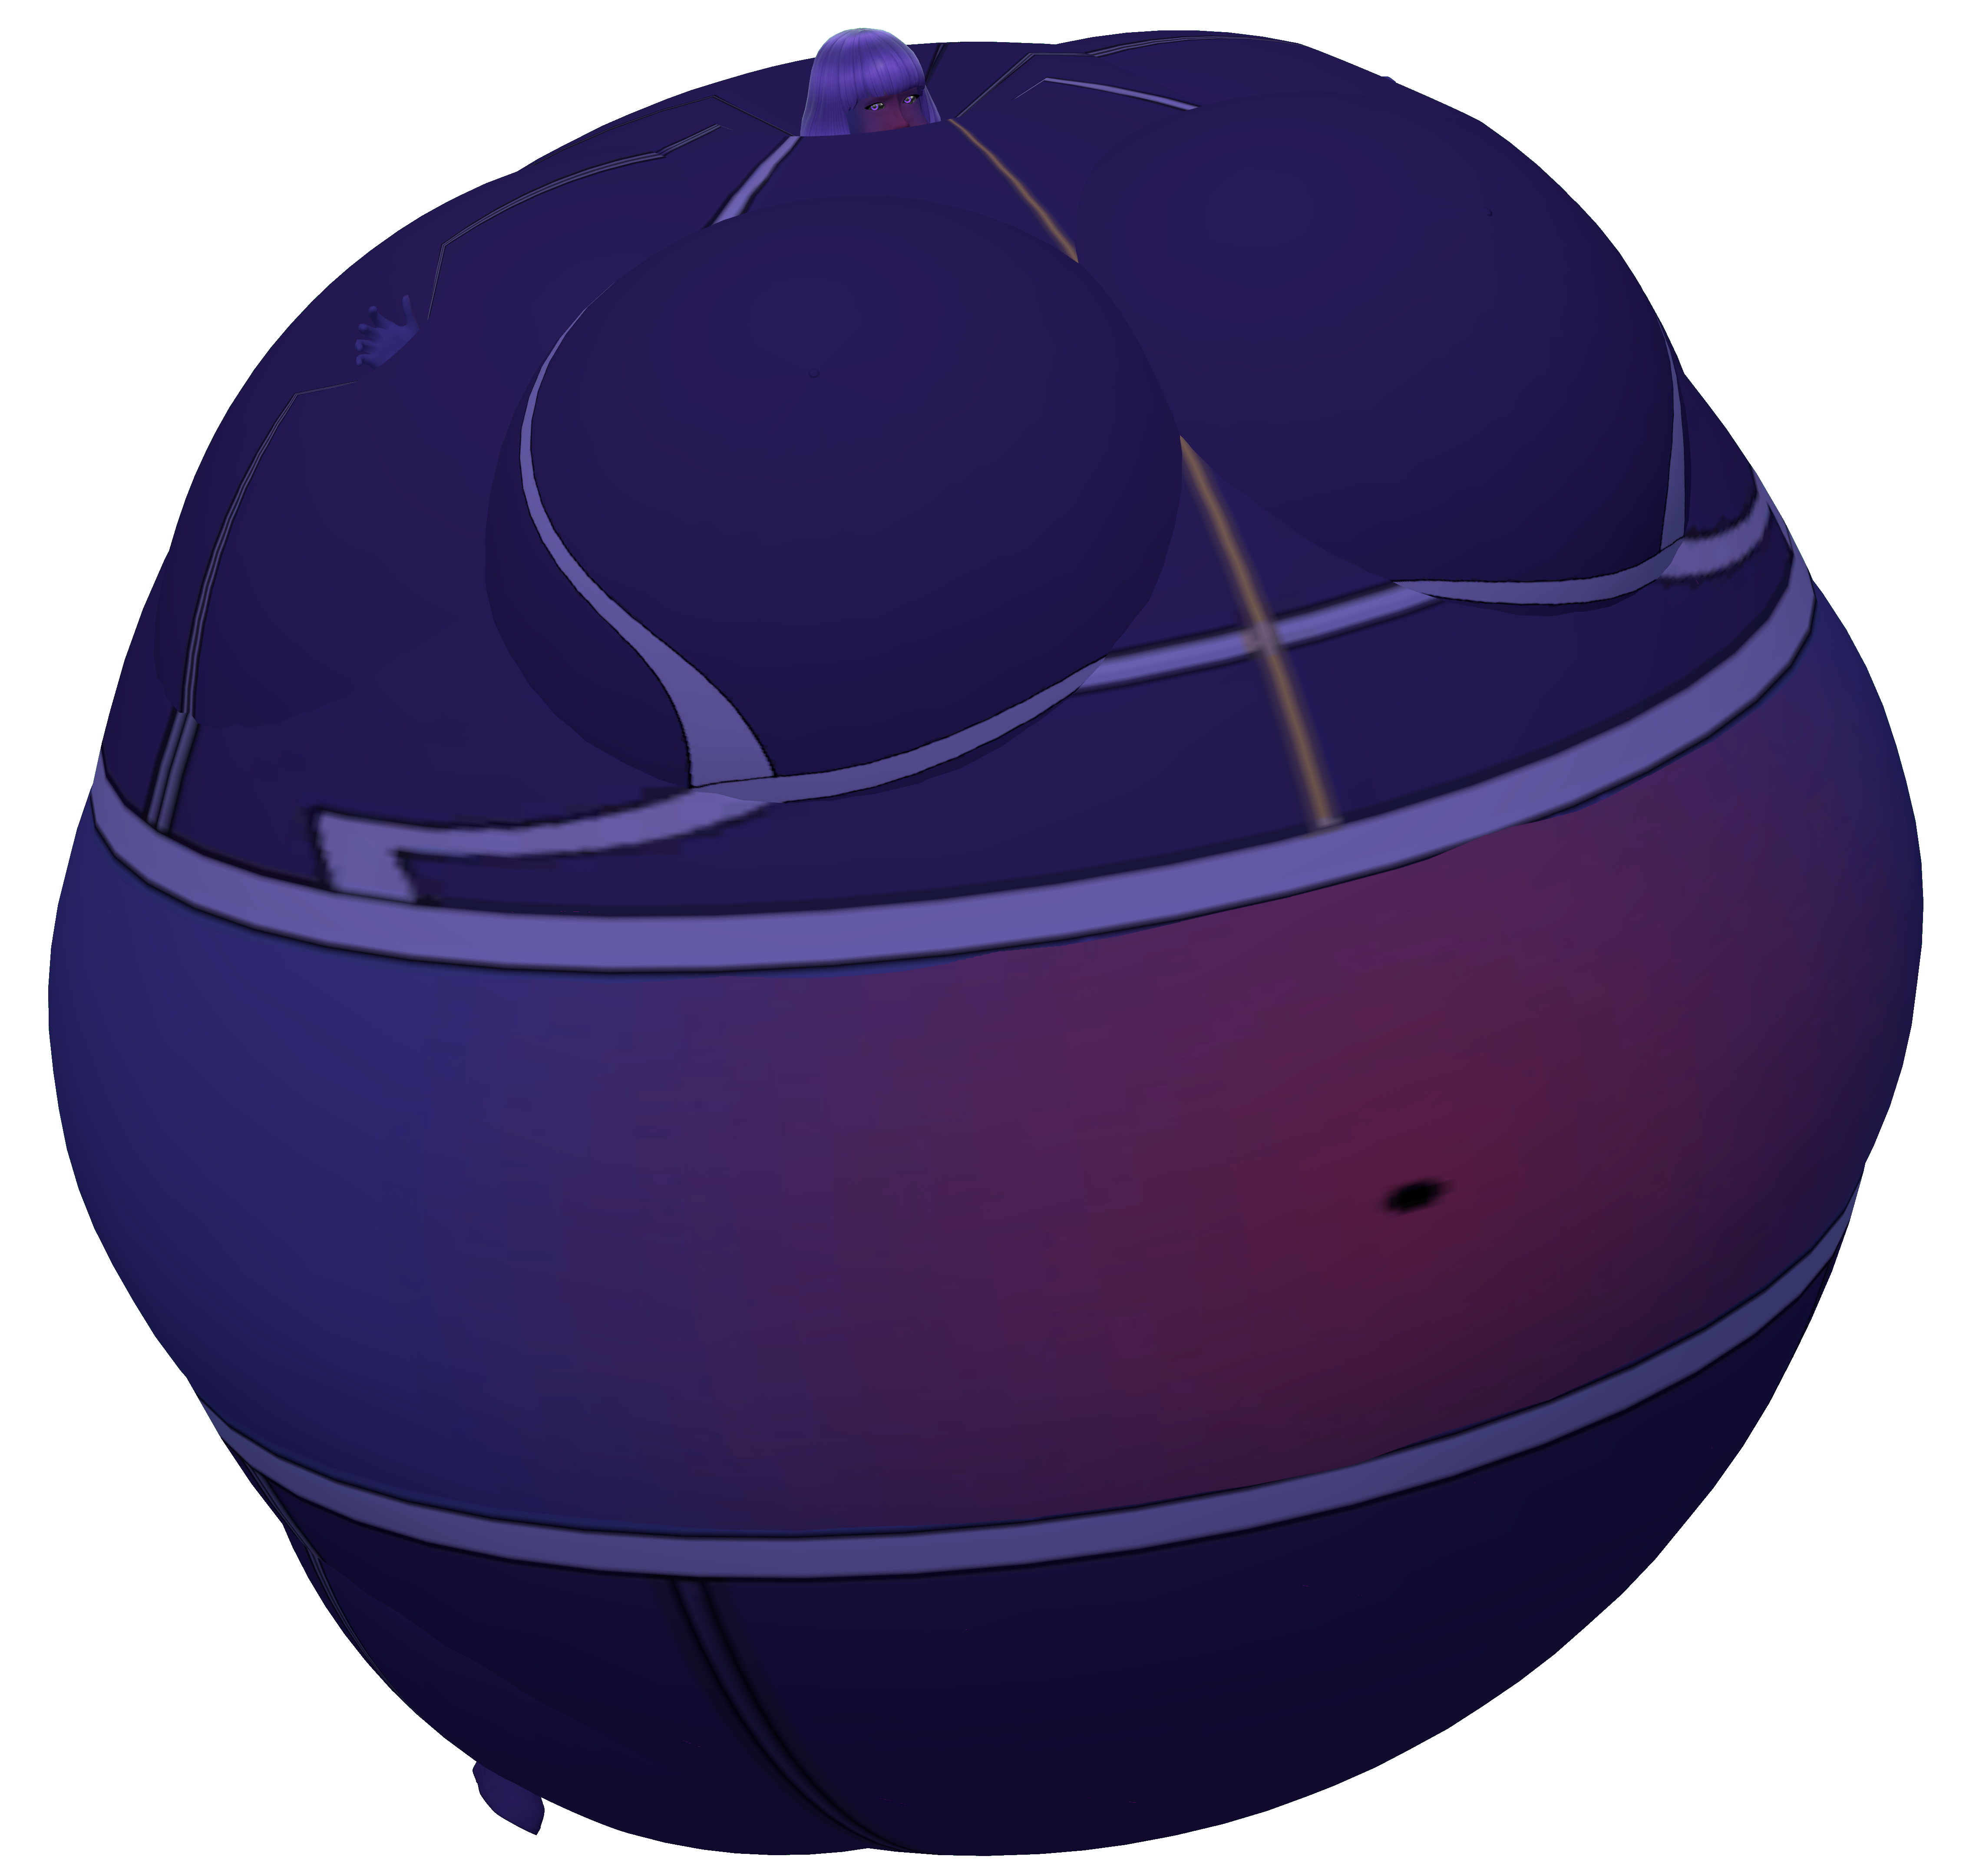 Violet Beauregard Blueberry Inflation GIF by WolfySweller on Newgrounds